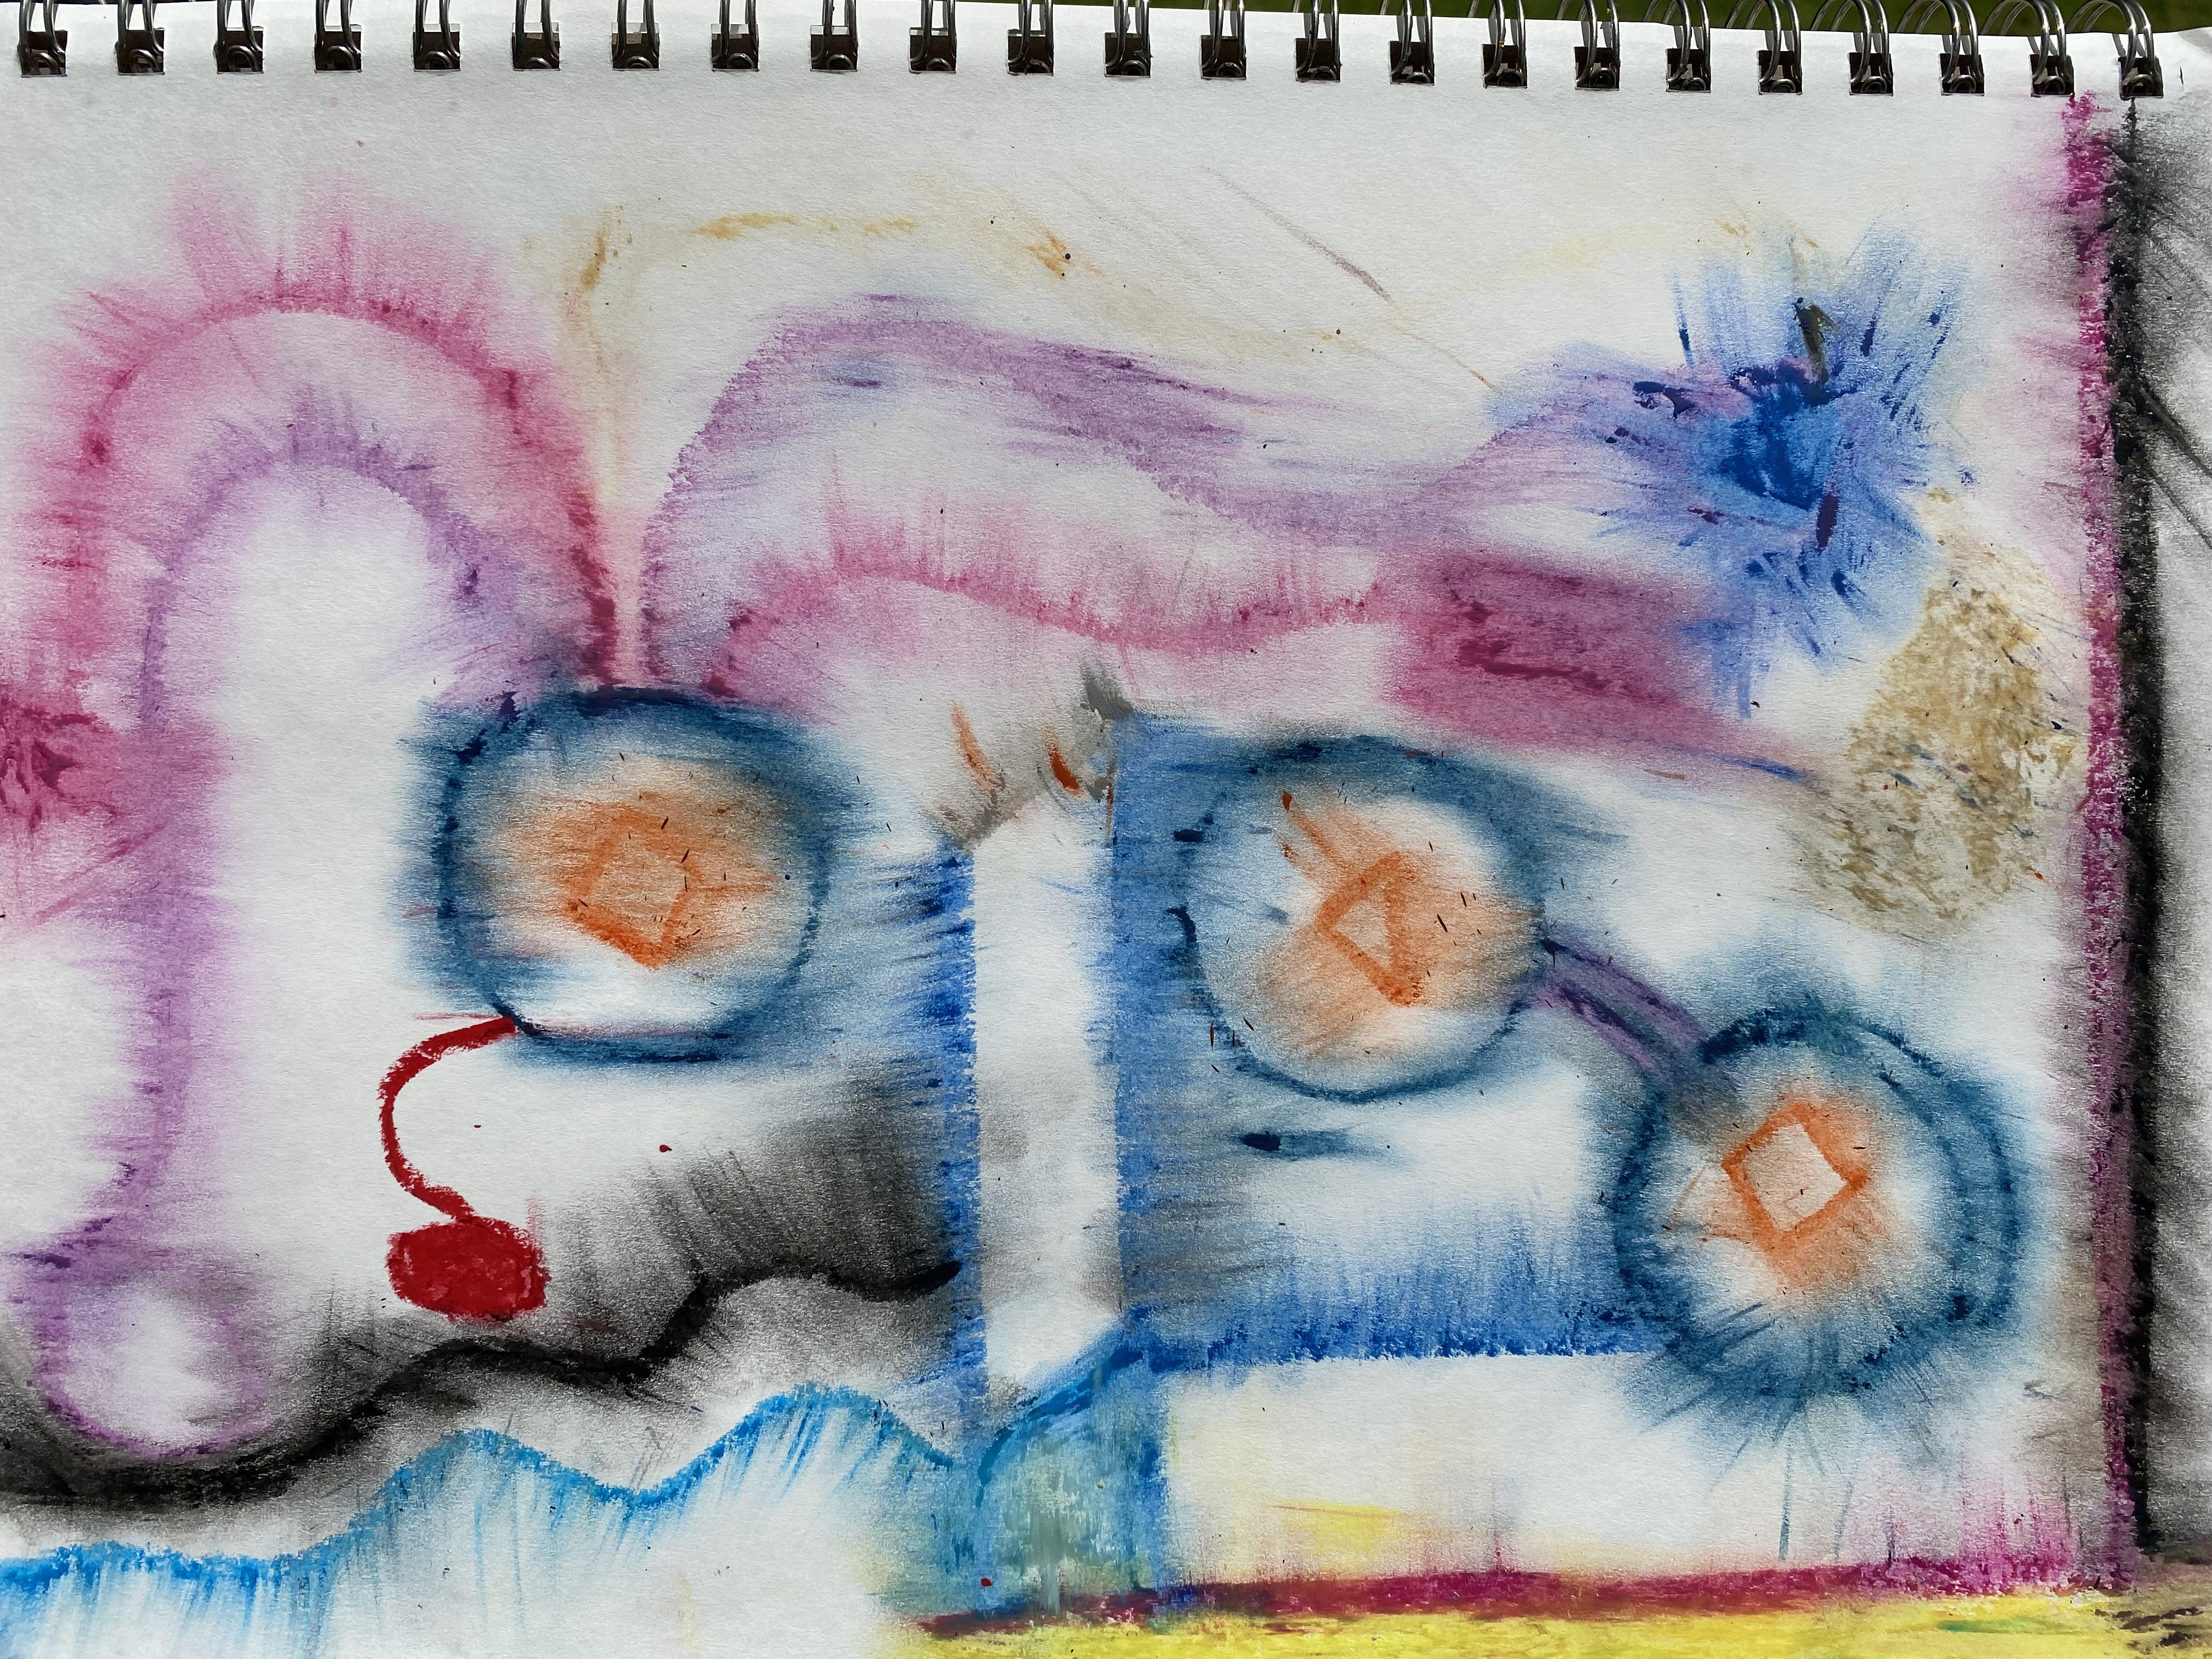 9in x 12in abstract oil pastel made on the artist's loft sketchbook.